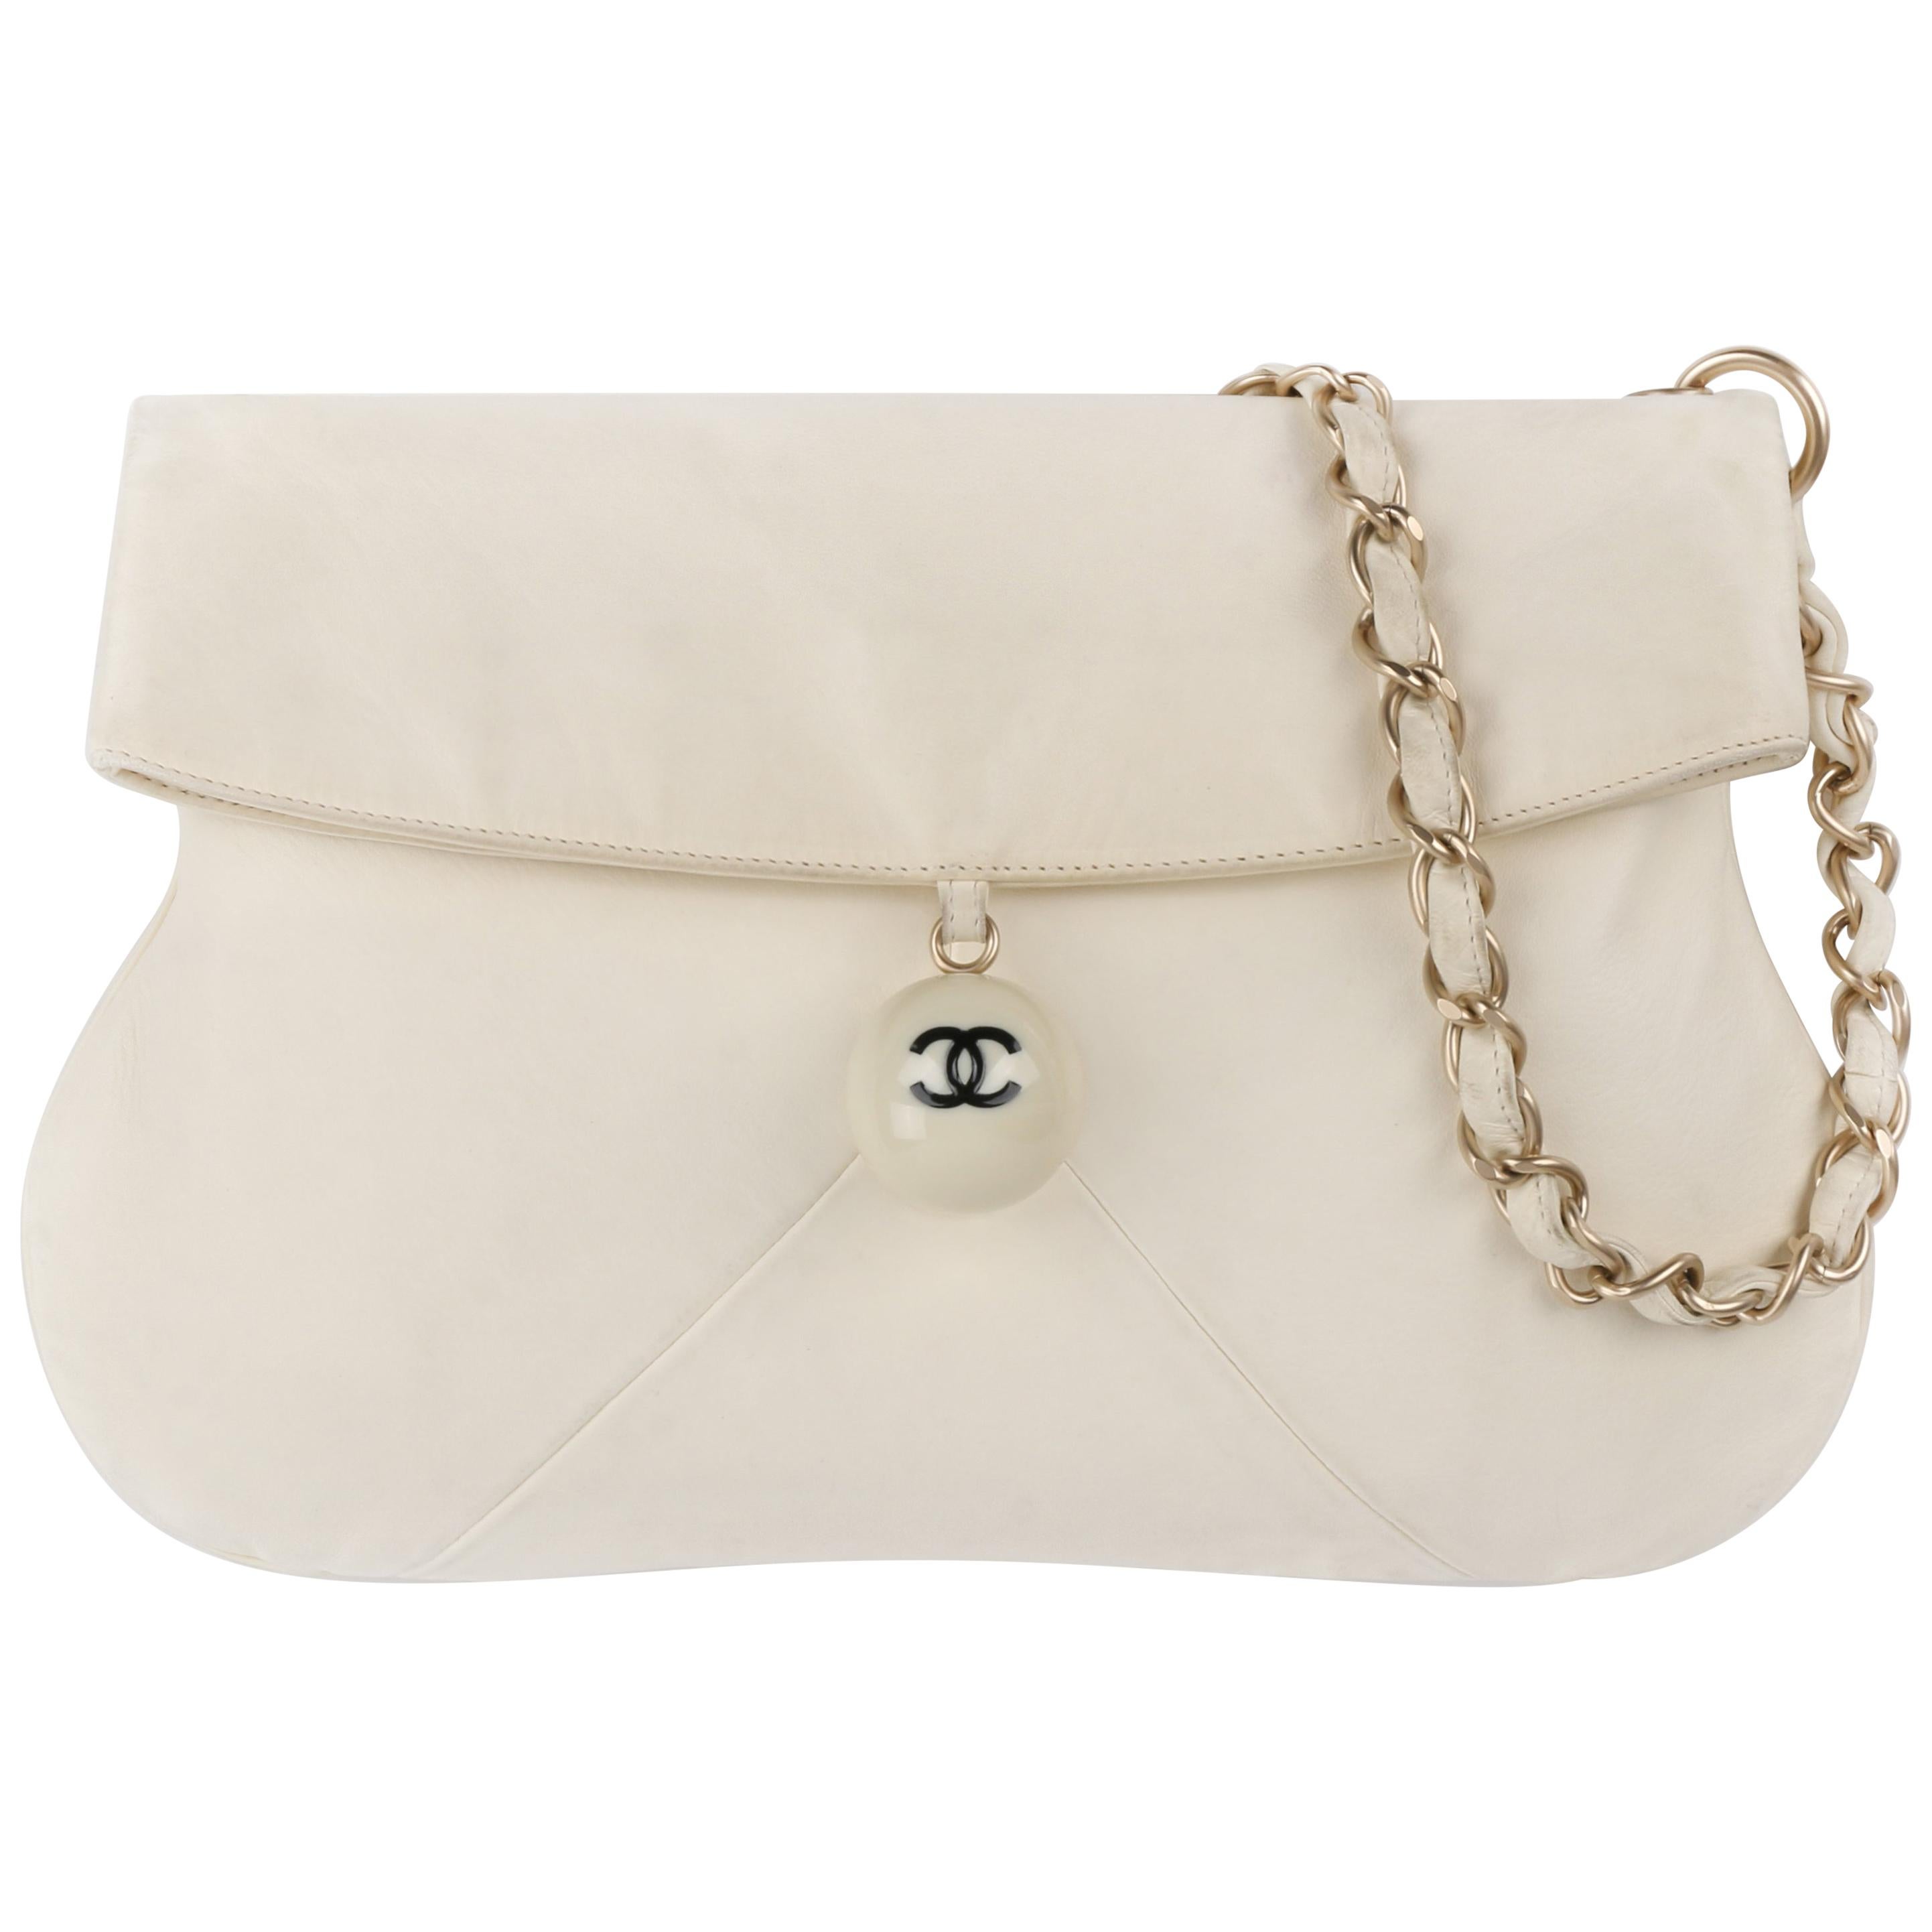 CHANEL c.2003 Ivory Lambskin Leather Coco Cue Ball Braided Chain Shoulder Bag